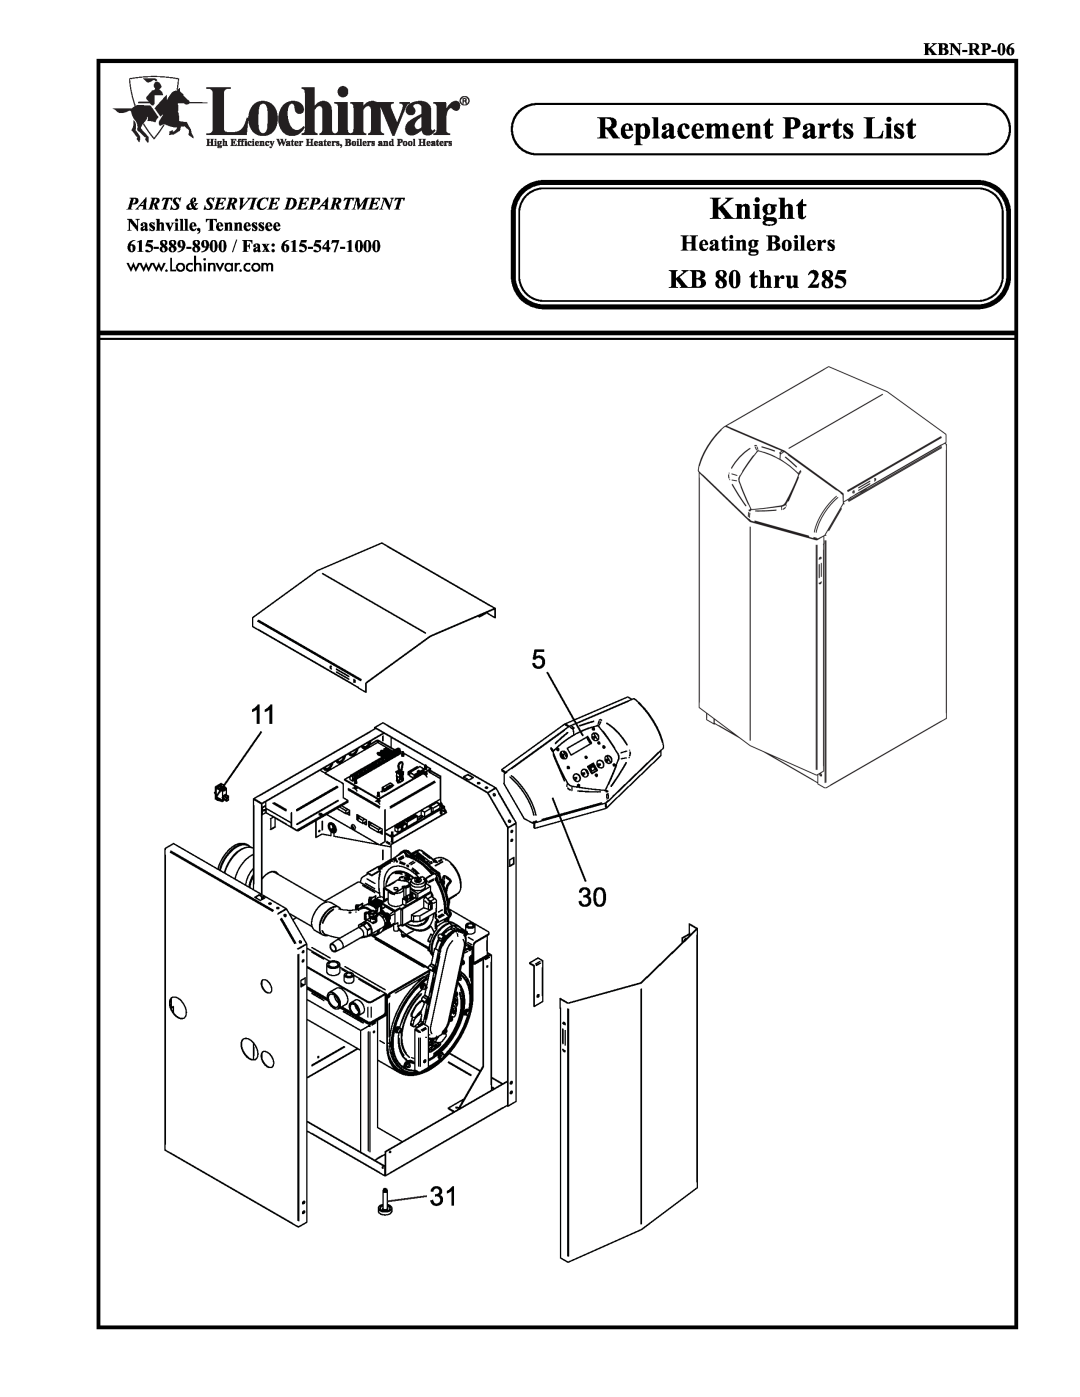 Lochinvar KB 80 thru 285 manual Replacement Parts List Knight, Heating Boilers, KBN-RP-06, Parts & Service Department 